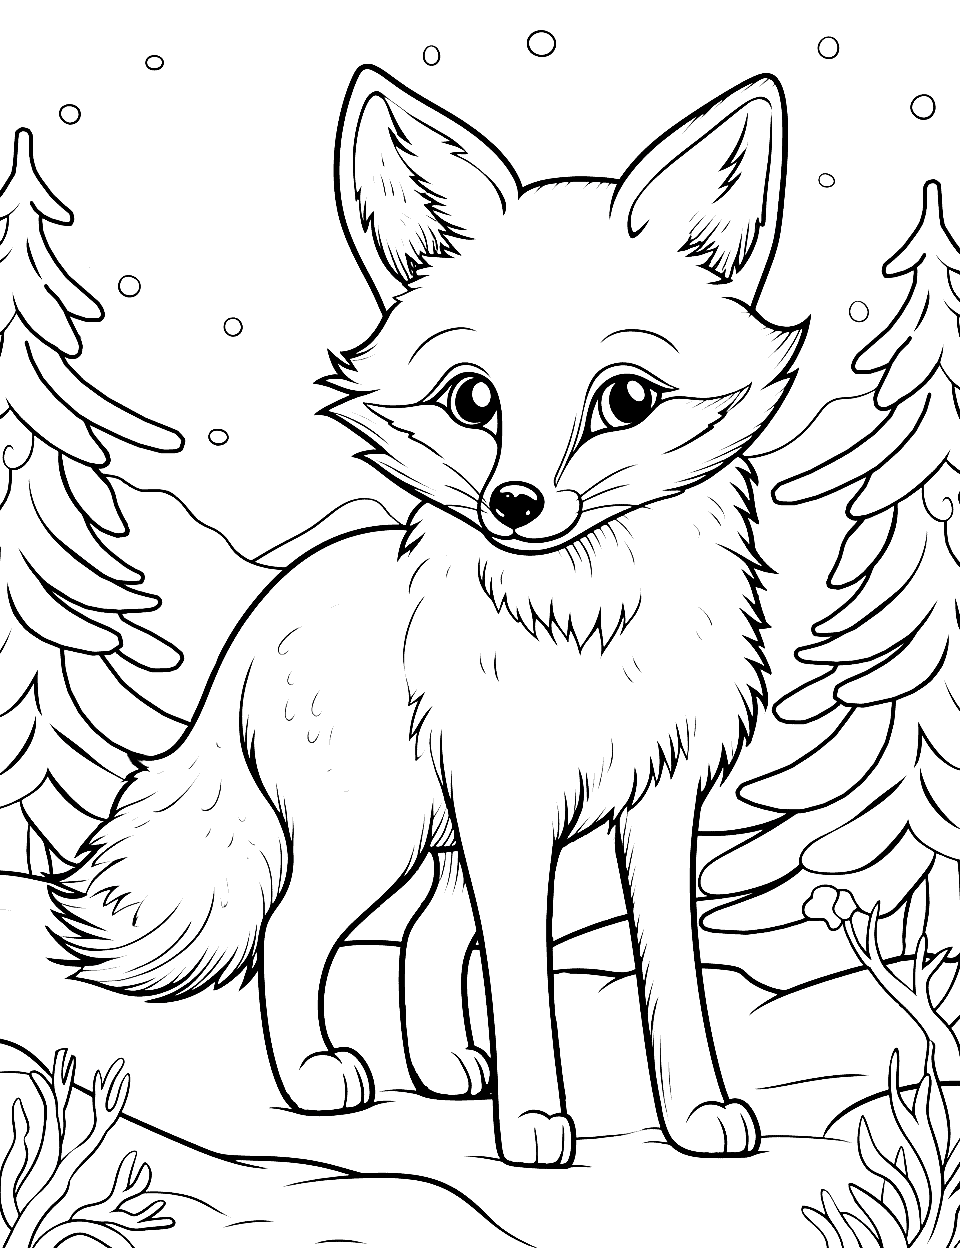 Fox's Winter Wonderland Fox Coloring Page - A fox in the snow, surrounded by winter beauty.